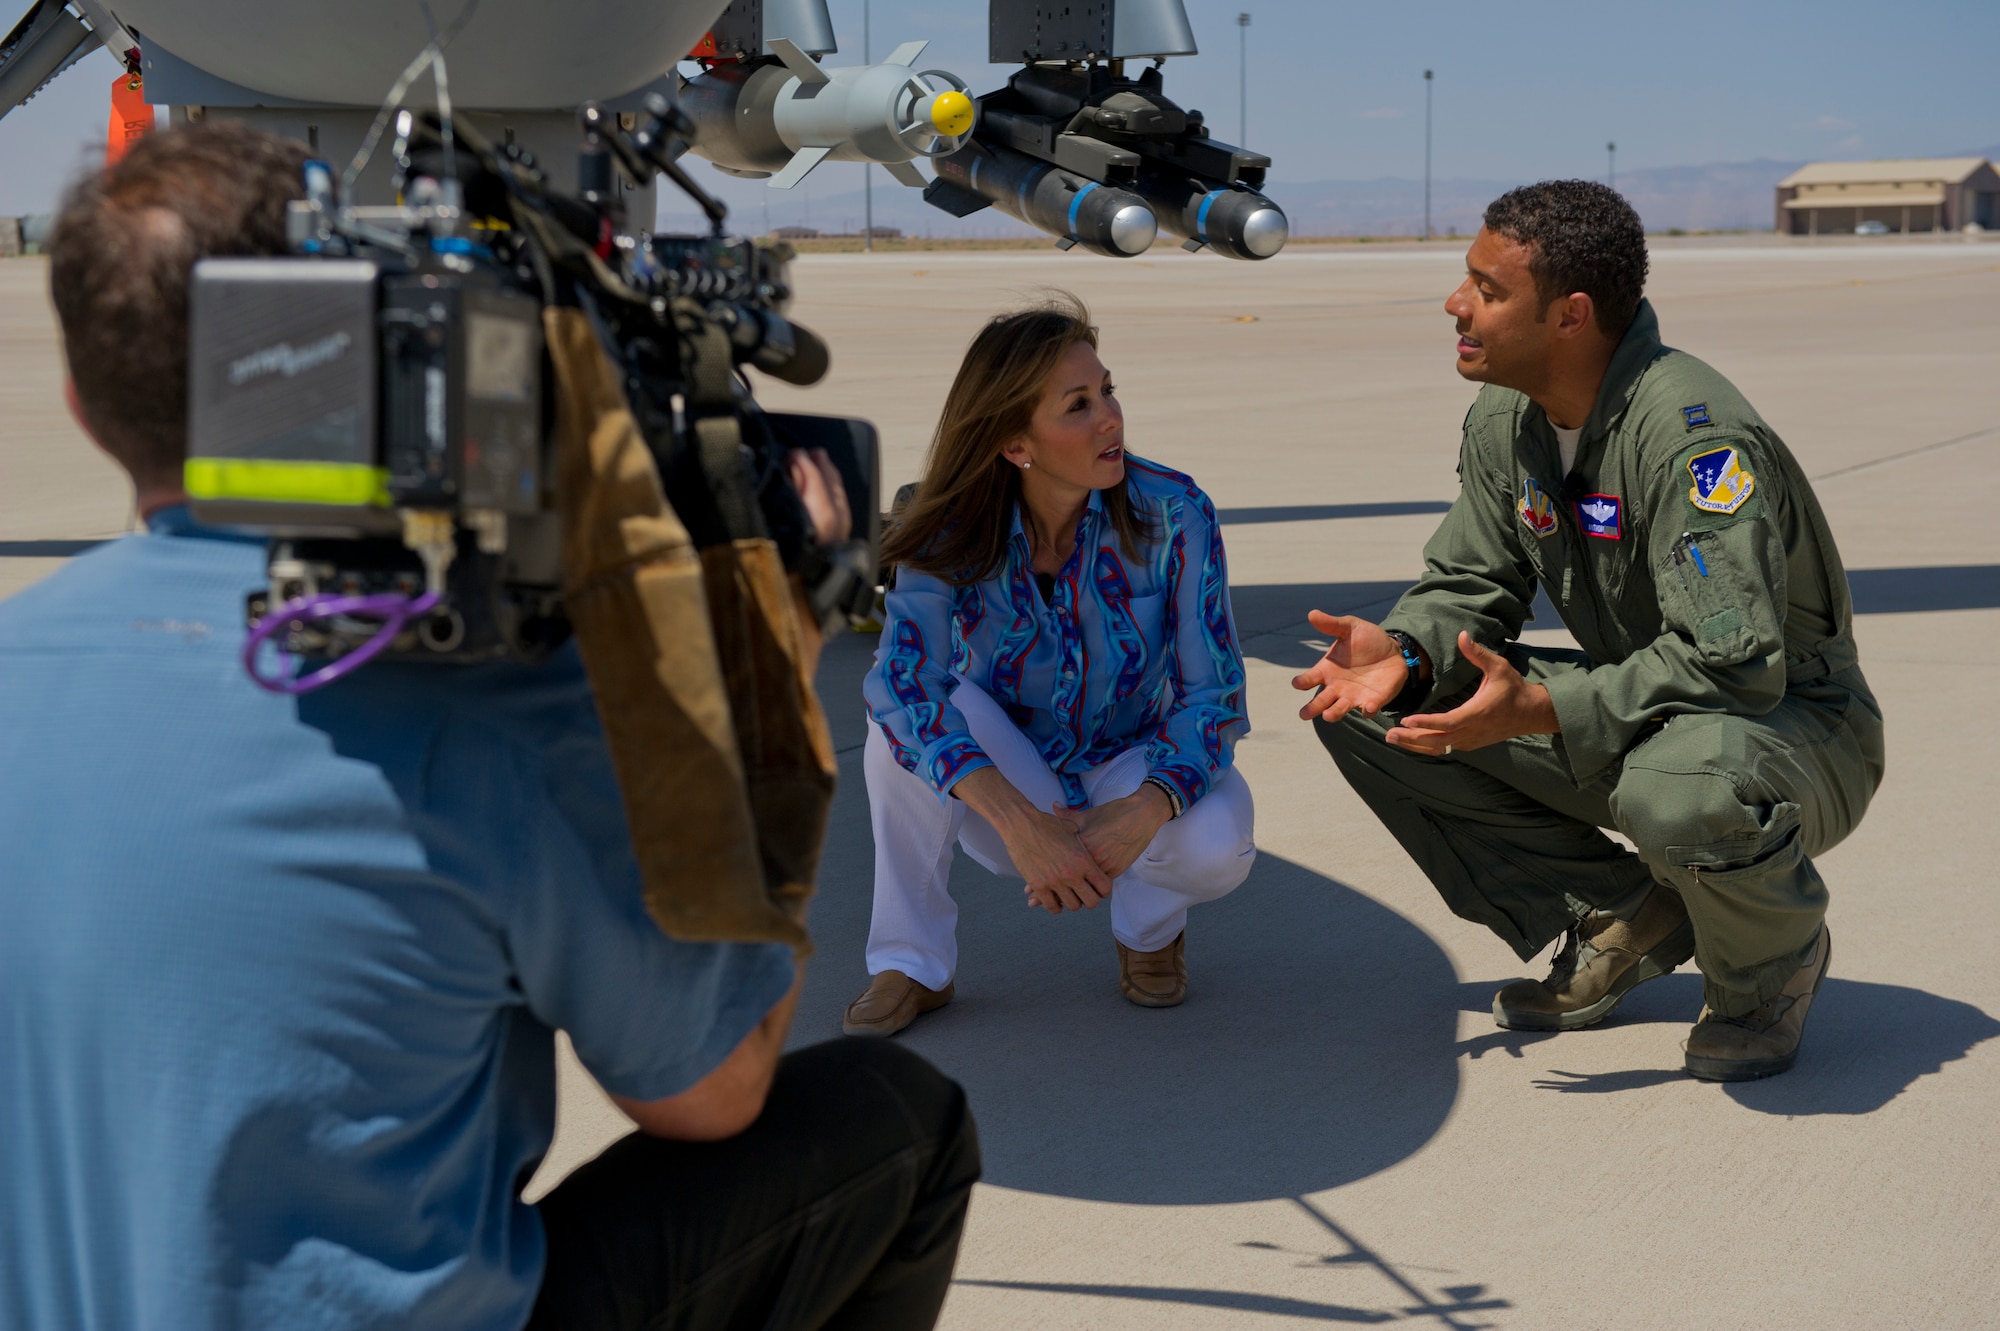 Janet Shamlian, NBC Today Show correspondent, interviews Capt. Anthony, 9th Attack Squadron instructor pilot, about the MQ-9 Reaper at Holloman Air Force Base, N.M., June 24. Capt. Anthony explained the payload and speed differences between the MQ-1 Predator and the MQ-9 Reaper. The Today Show visited Holloman AFB to do a report on the Remotely Piloted Aircraft training program. According to current Air Force guidance, the last name of RPA pilots and sensor operators are not releasable due to operational security constraints. (U.S. Air Force photo by Airman 1st Class Aaron Montoya/Released)